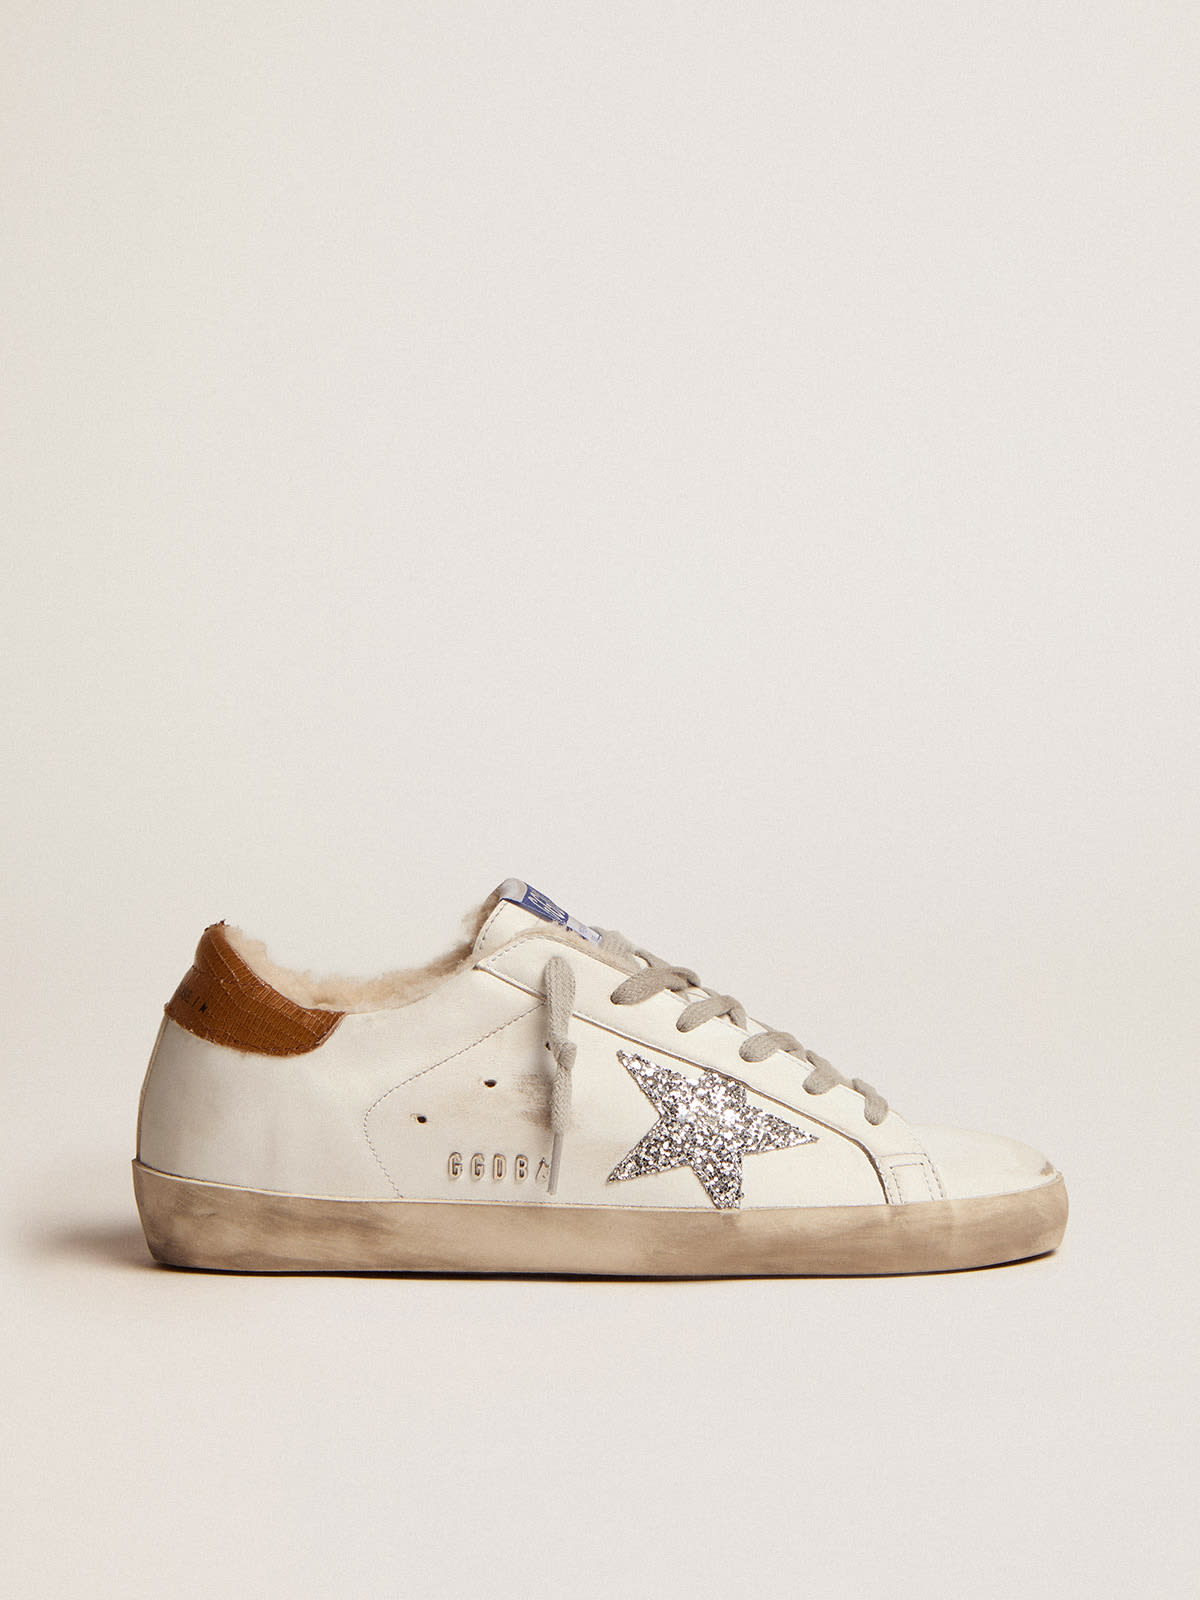 Golden Goose - Super-Star sneakers with shearling lining, silver glitter star and lizard-print dove-gray leather heel tab in 